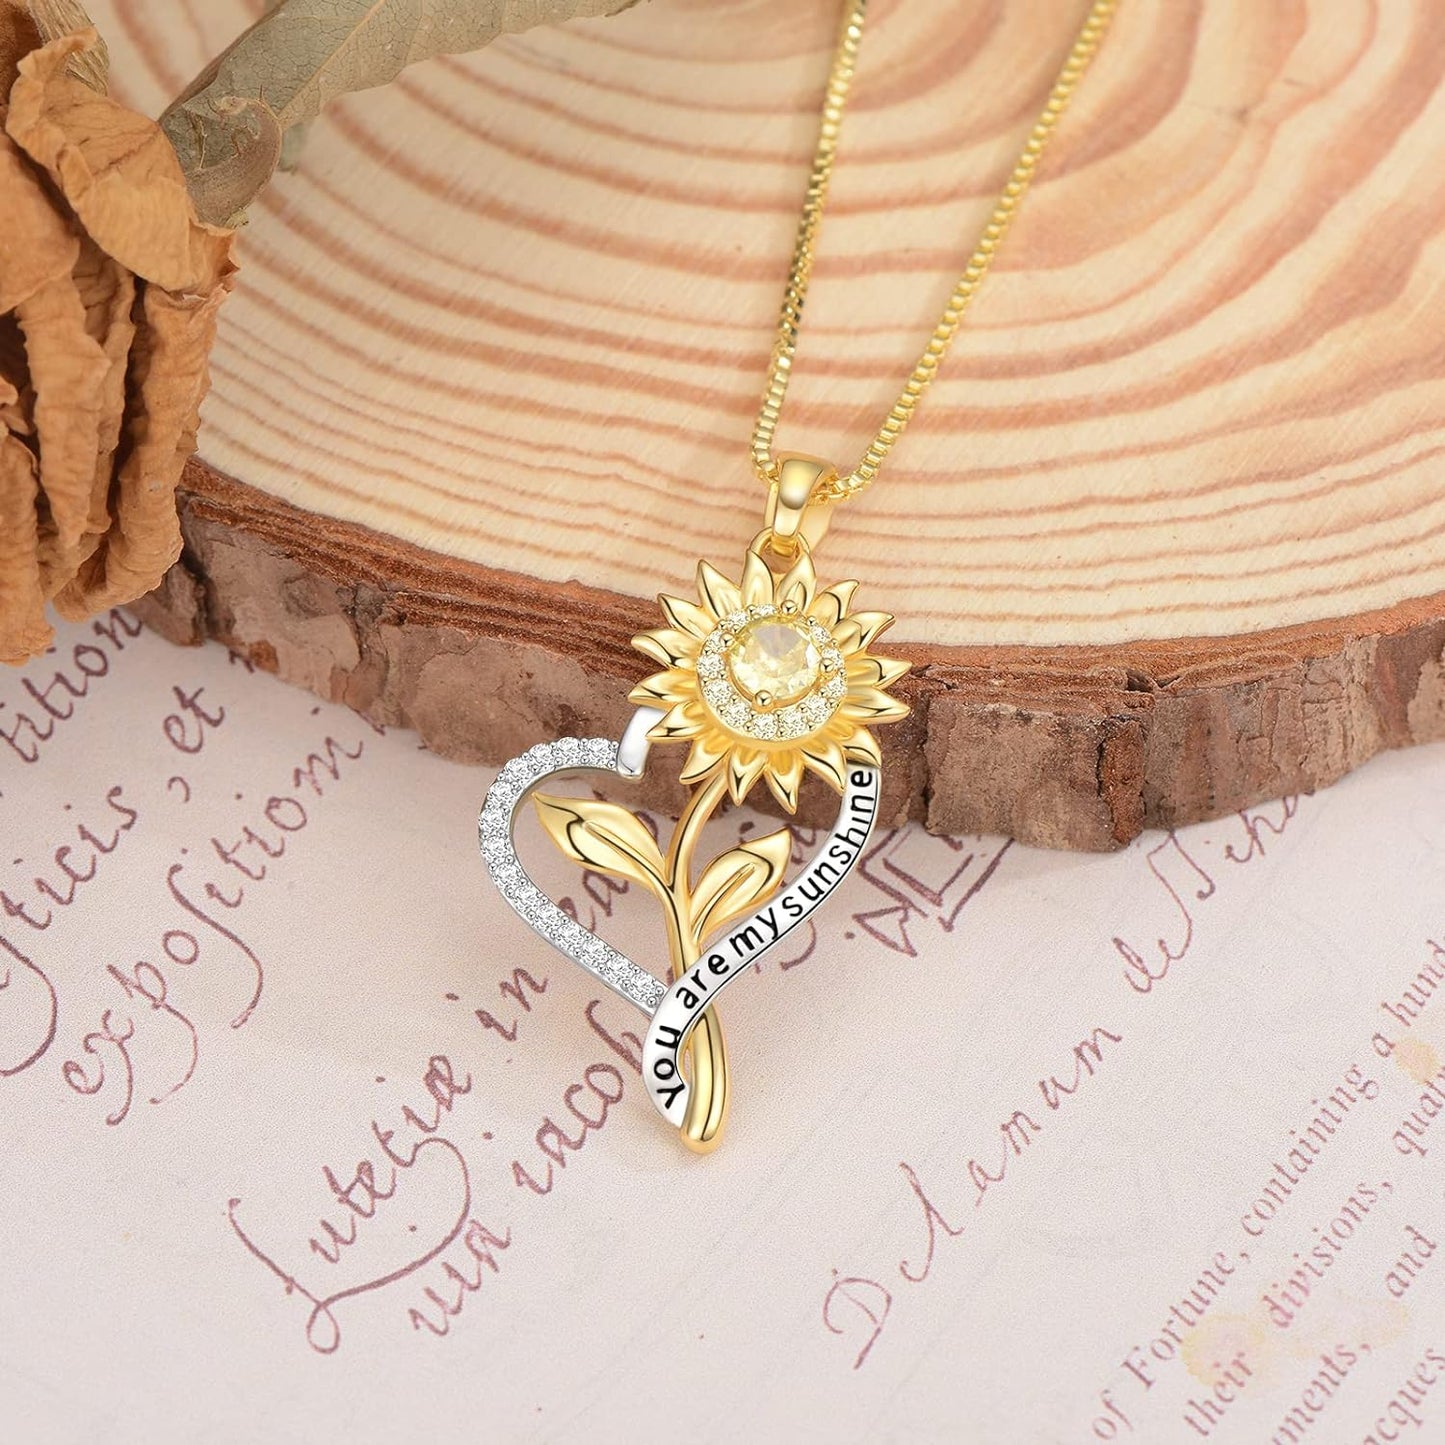 Sunflower Necklace for Women, 18k Gold Plated S925 Sterling Silver Sunflower Jewelry for Women, You Are My Sunshine Necklace for Girls, Anniversary Necklaces for Wife Girlfriend Mom Jewelry Gift fo